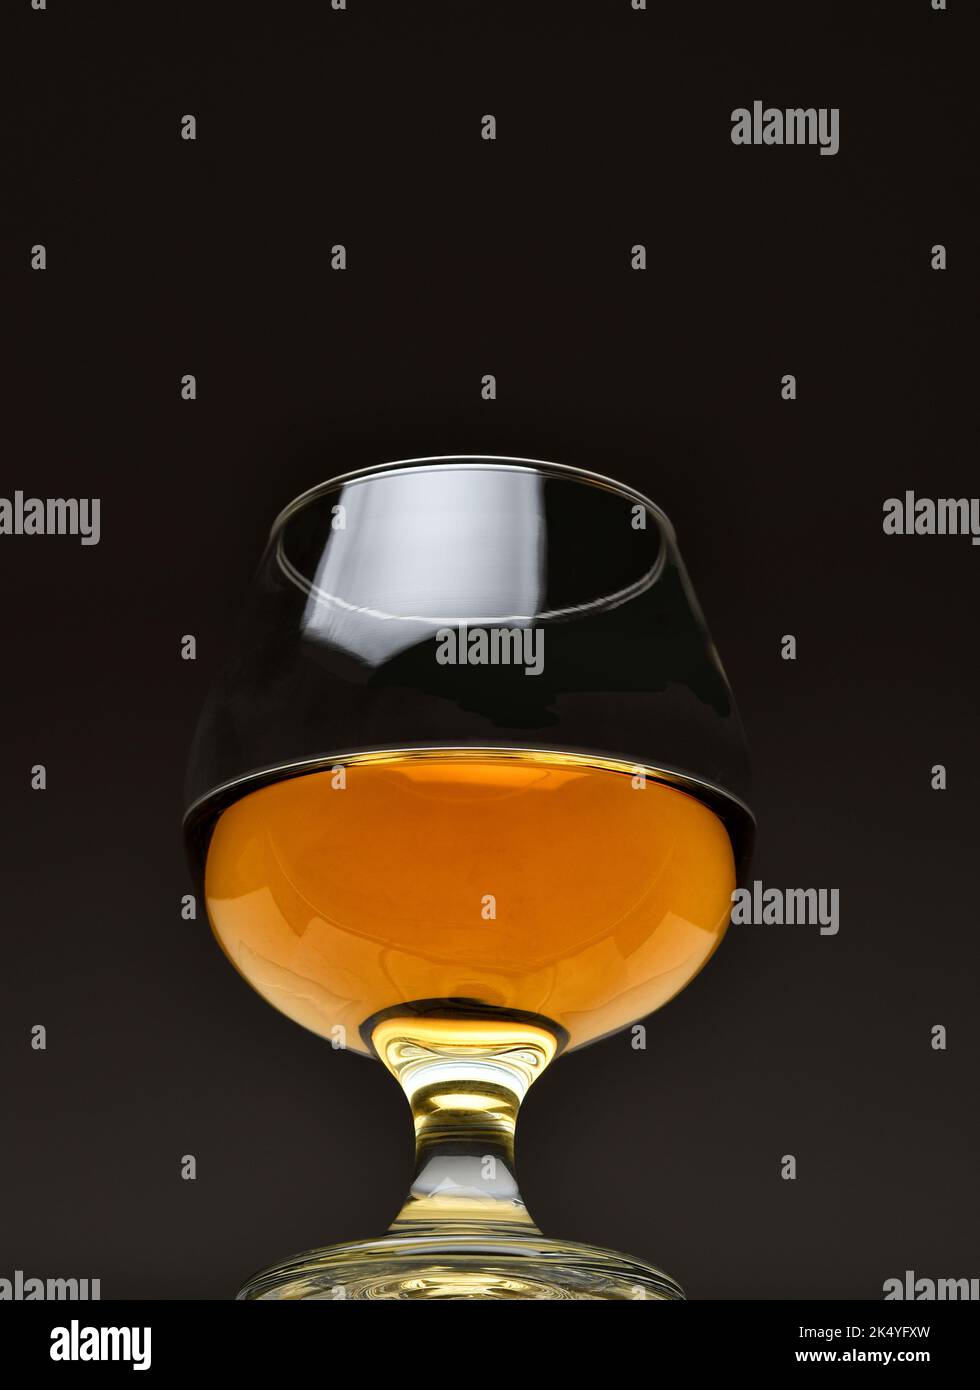 Brandy Snifter viewed for a low angle against a dark background. Stock Photo